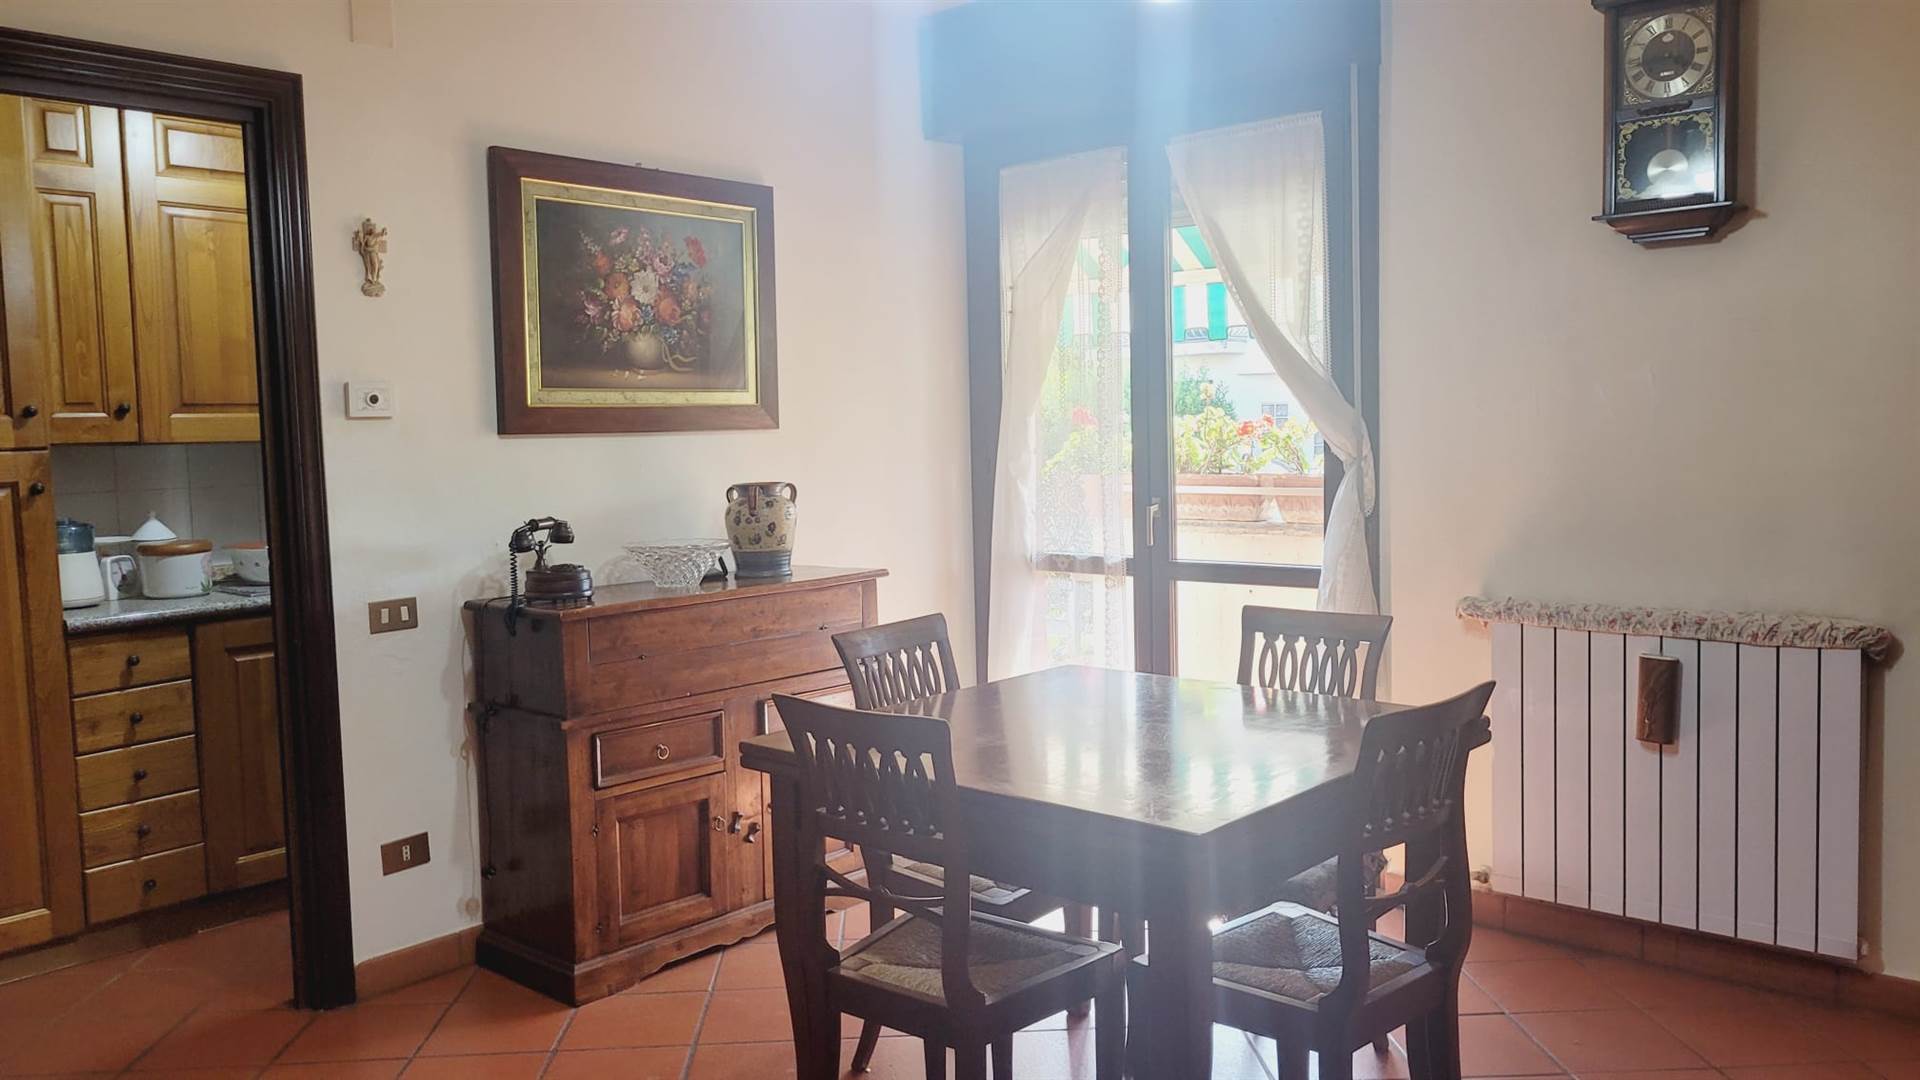 LE PINETE, FUCECCHIO, Detached apartment for rent of 60 Sq. mt., Excellent Condition, Heating Individual heating system, Energetic class: F, Epi: 170,